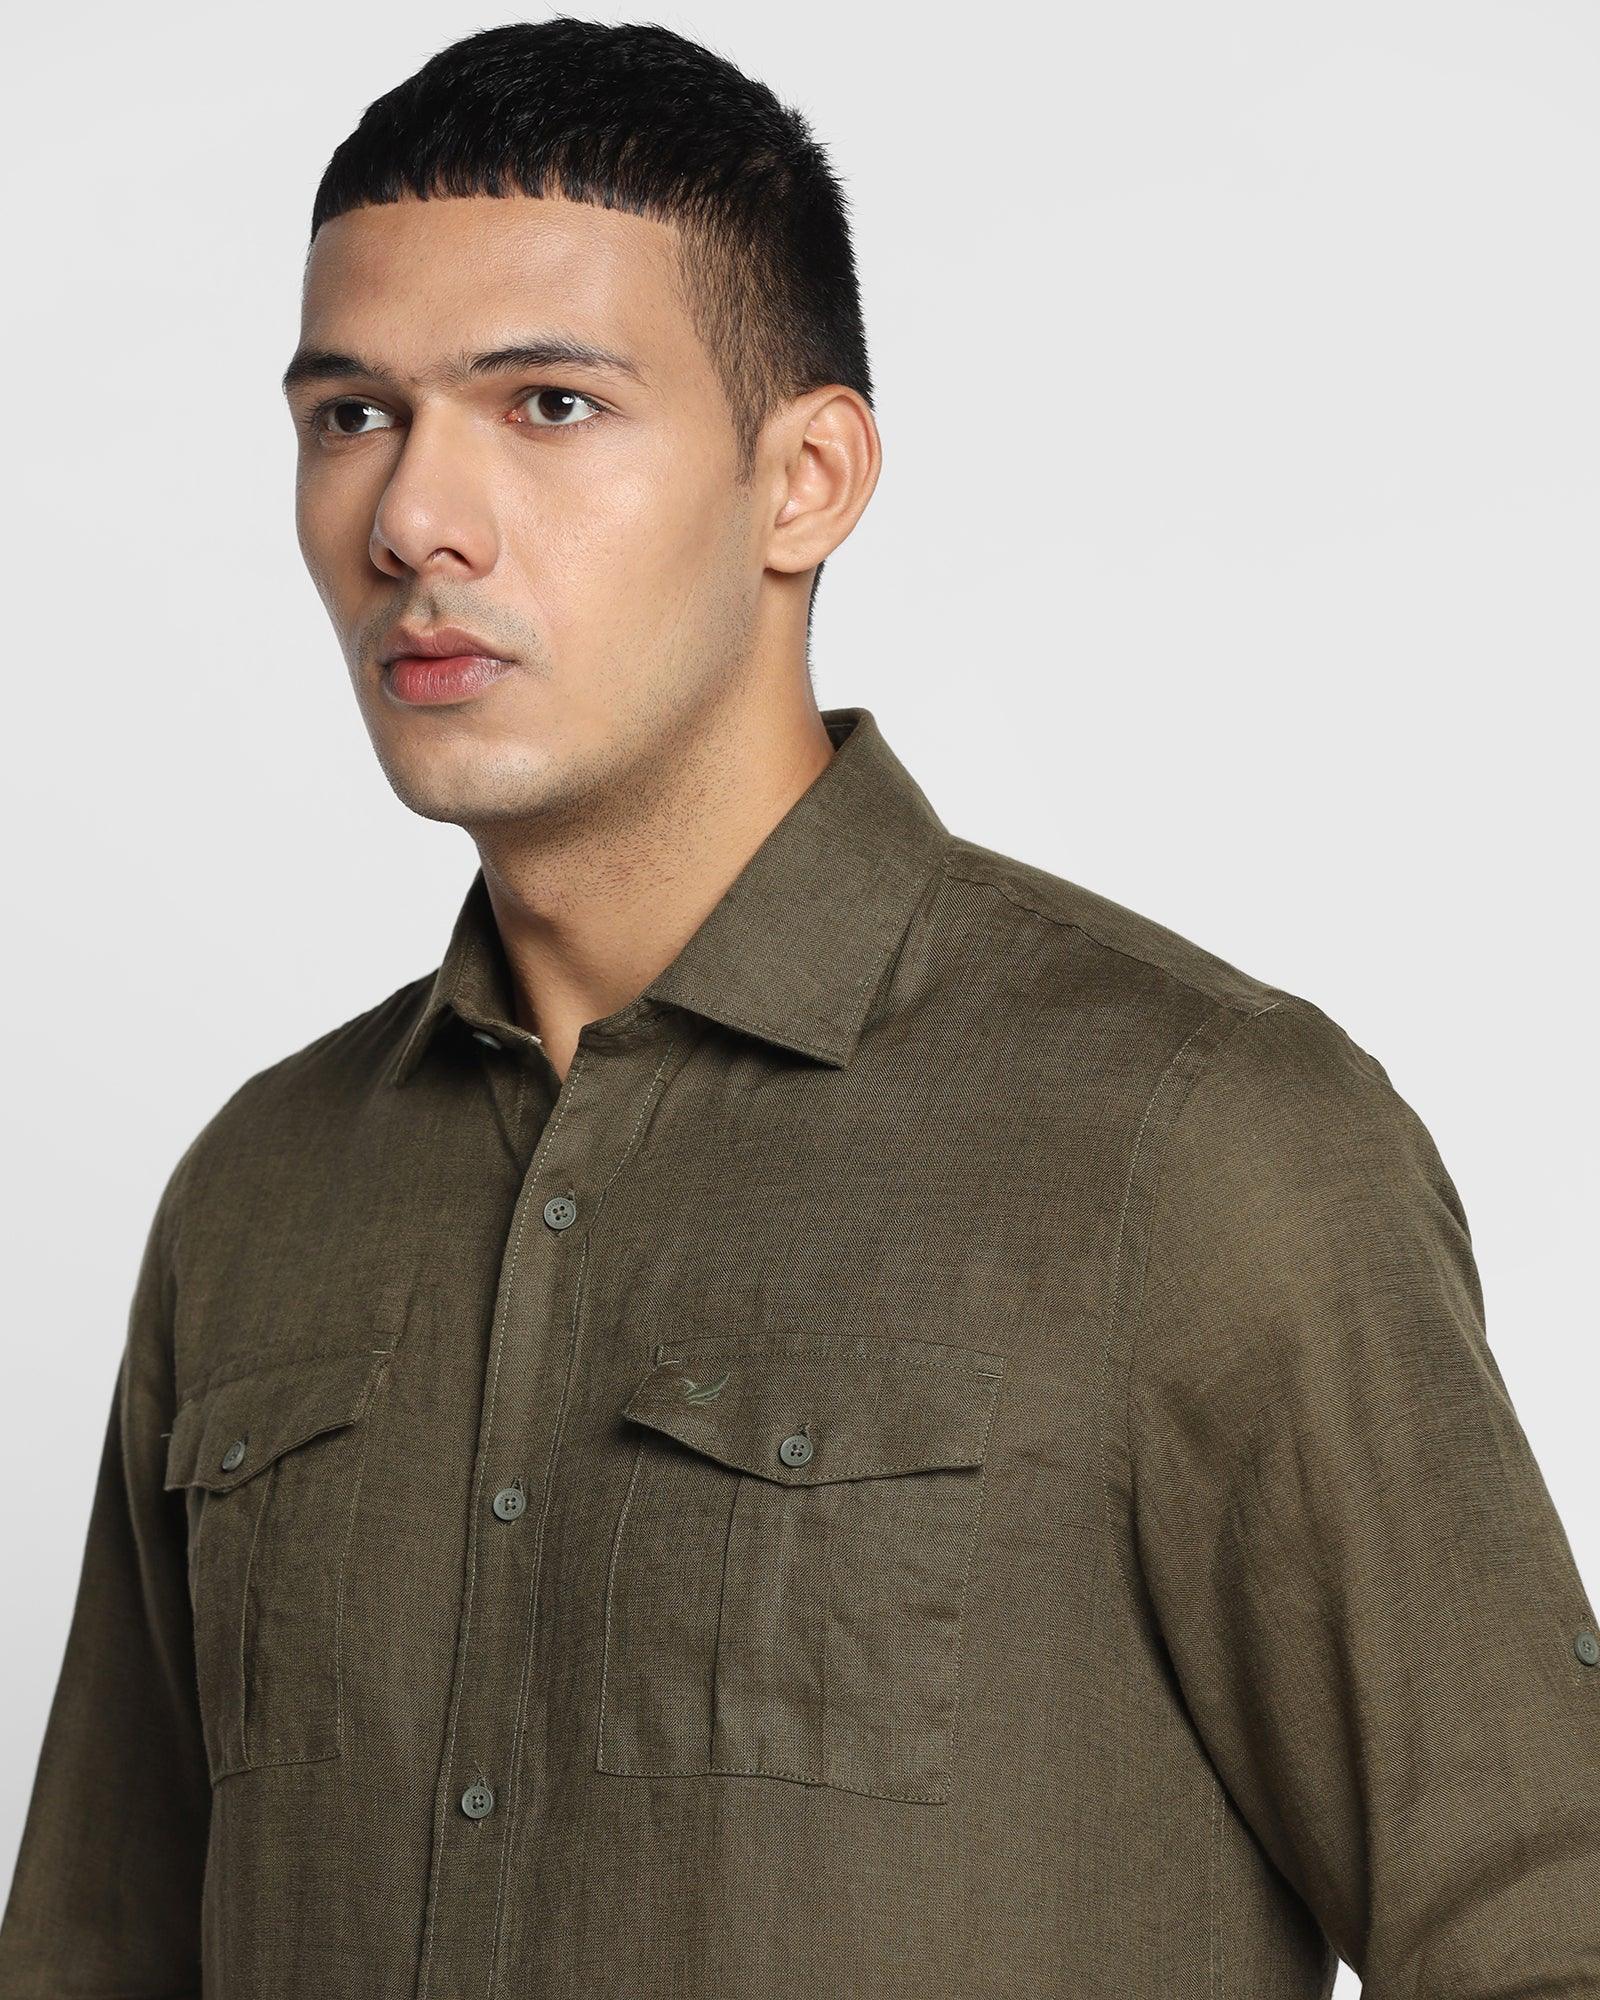 Linen Casual Olive Solid Shirt - Port